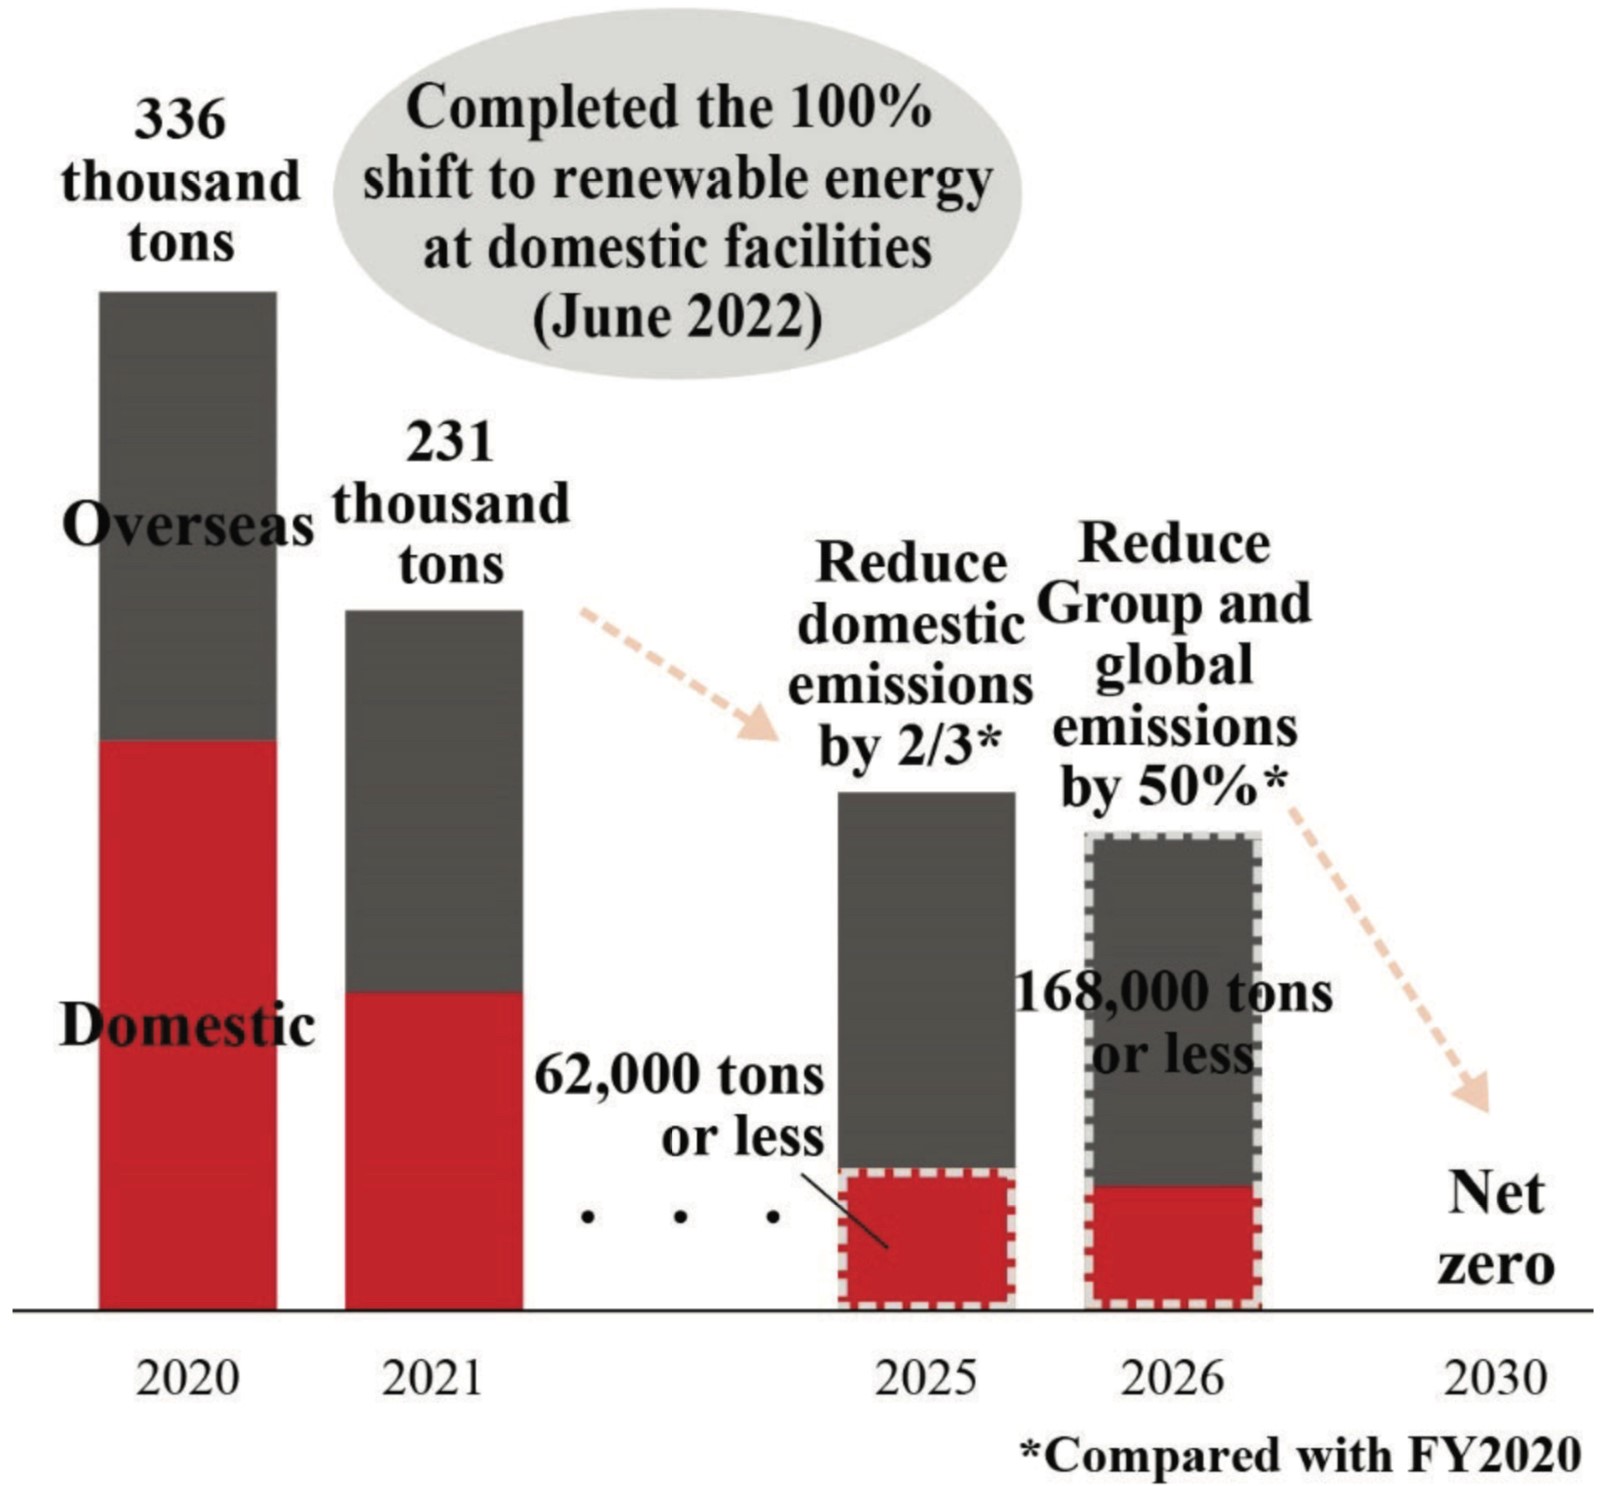 Net Zero GHG Emissions from Our Own Operations